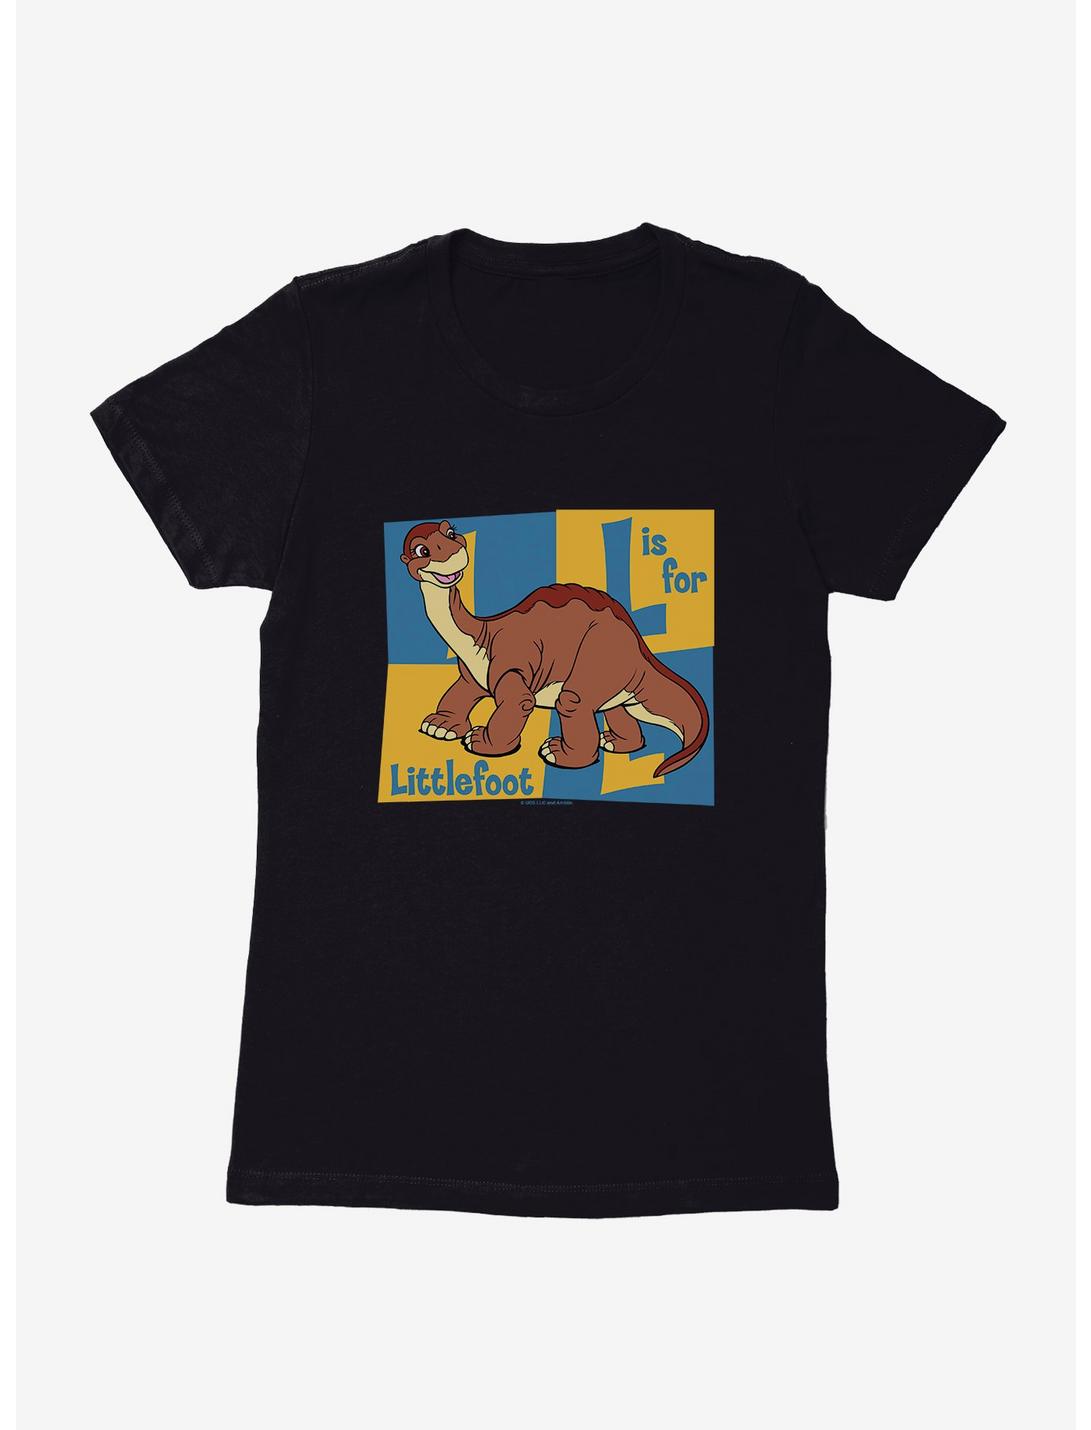 The Land Before Time L Is For Littlefoot Womens T-Shirt, BLACK, hi-res